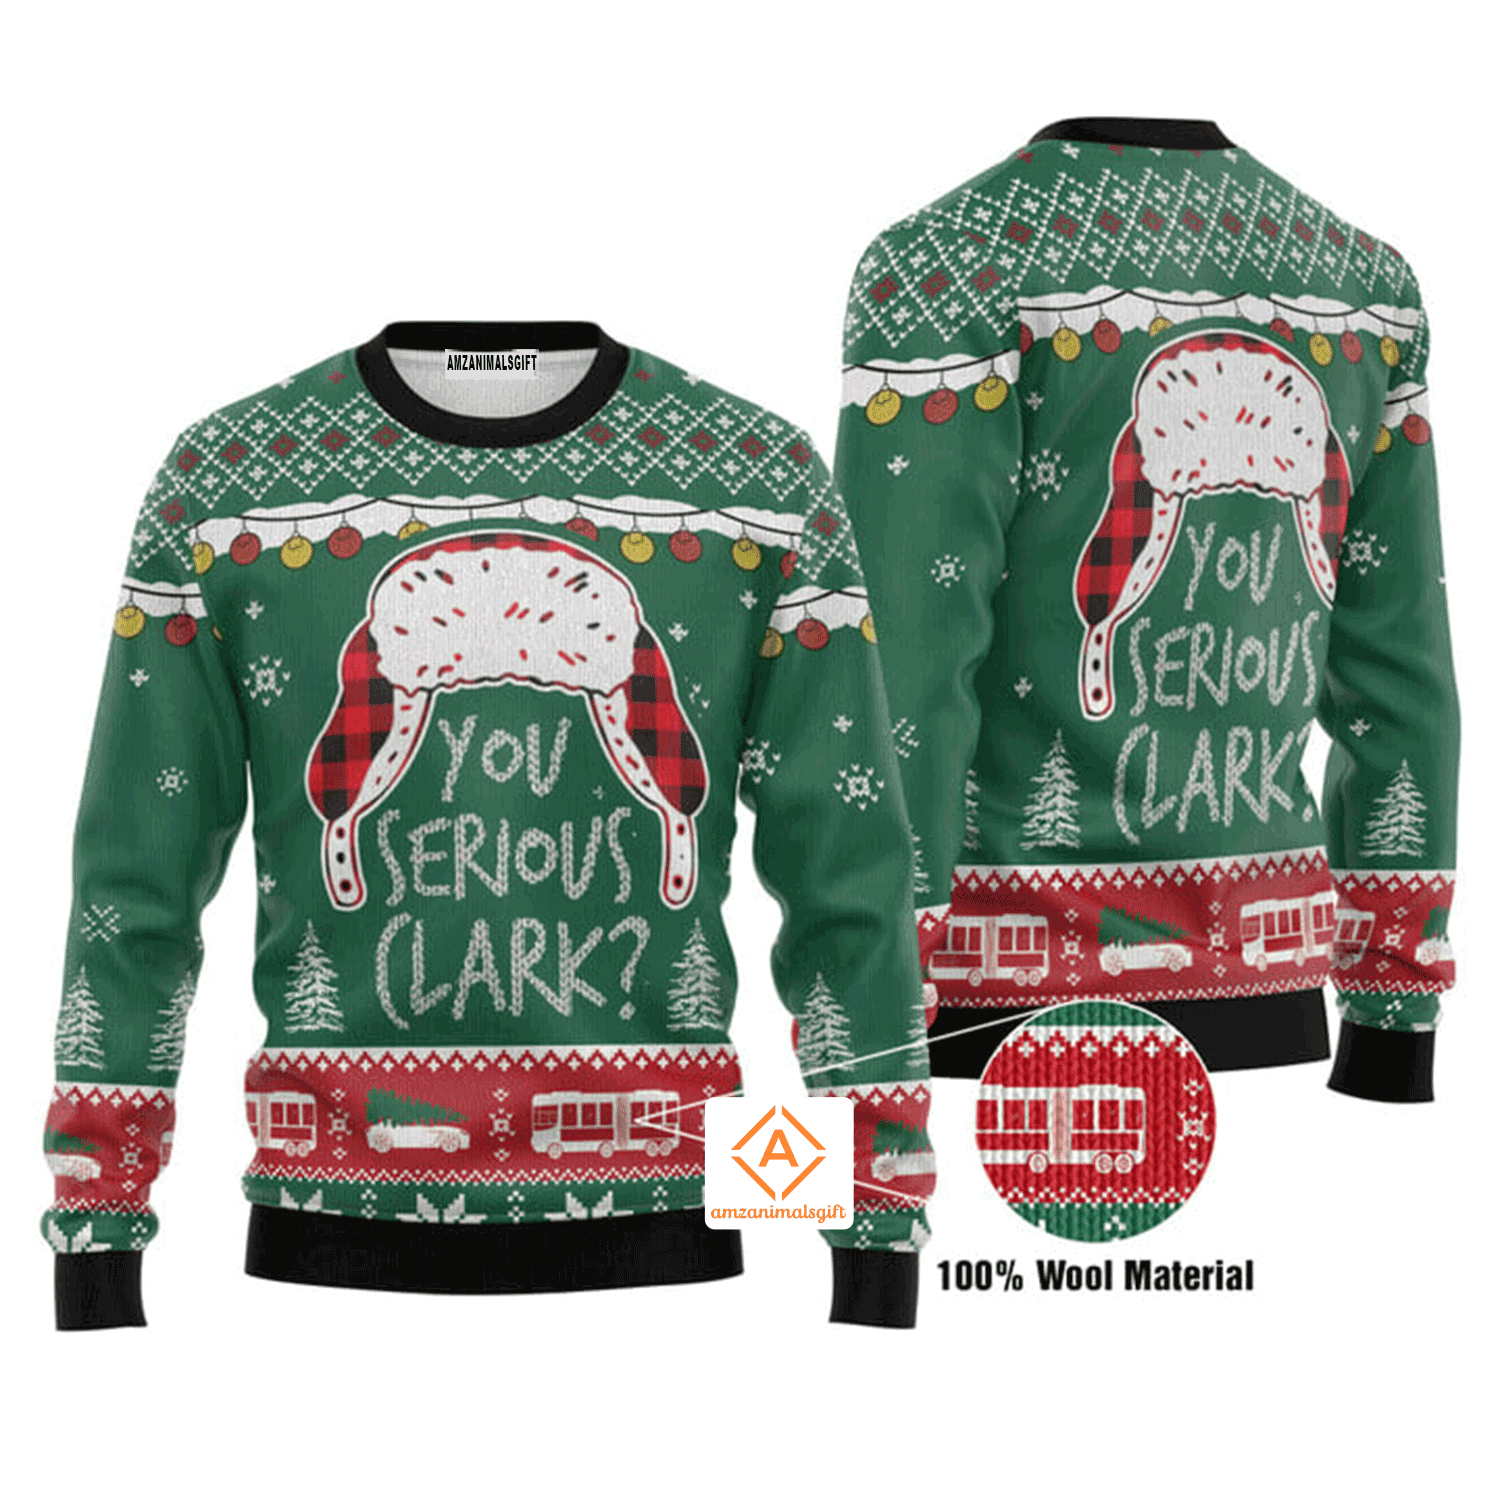 You Serious Clark Christmas Sweater, Ugly Sweater For Men & Women, Perfect Outfit For Christmas New Year Autumn Winter